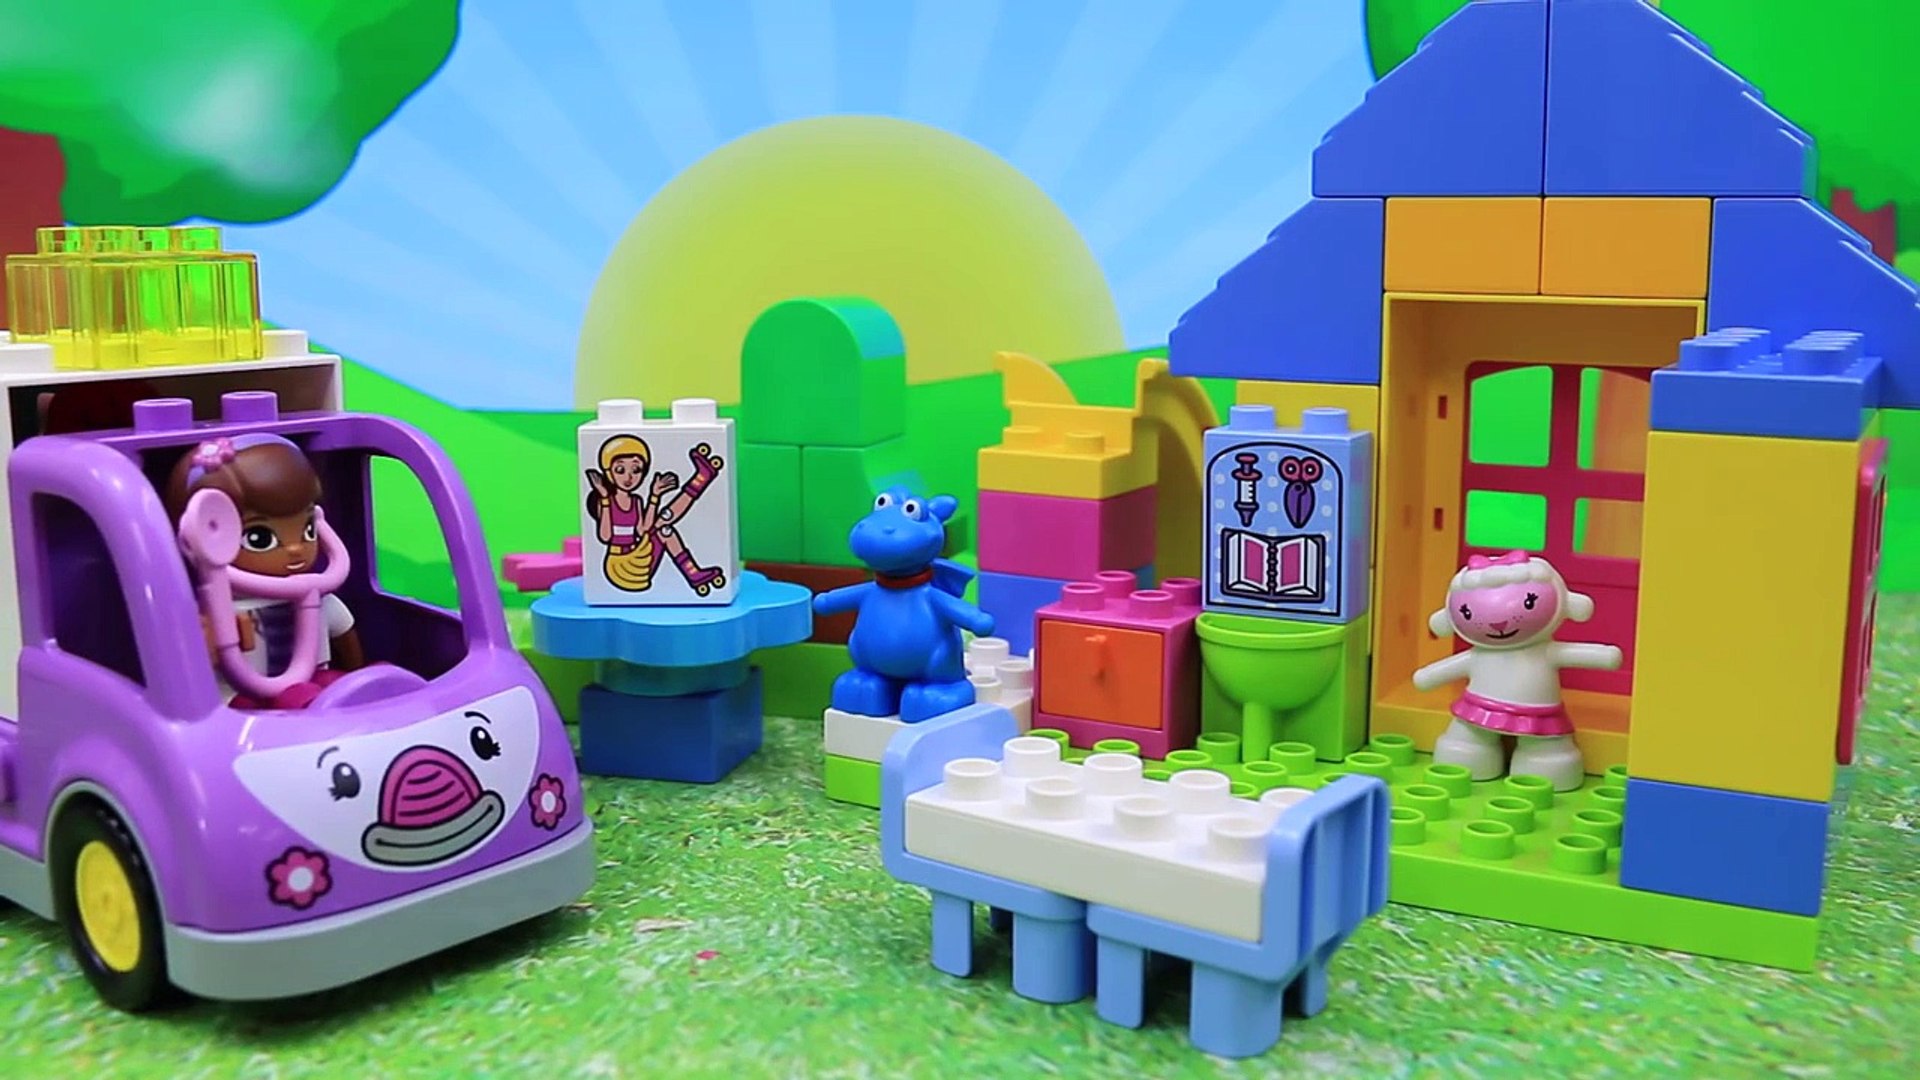 Doc McStuffins Duplo Lego Ambulance with Superheroes Superman and Batman  with Spiderman - Dailymotion Video